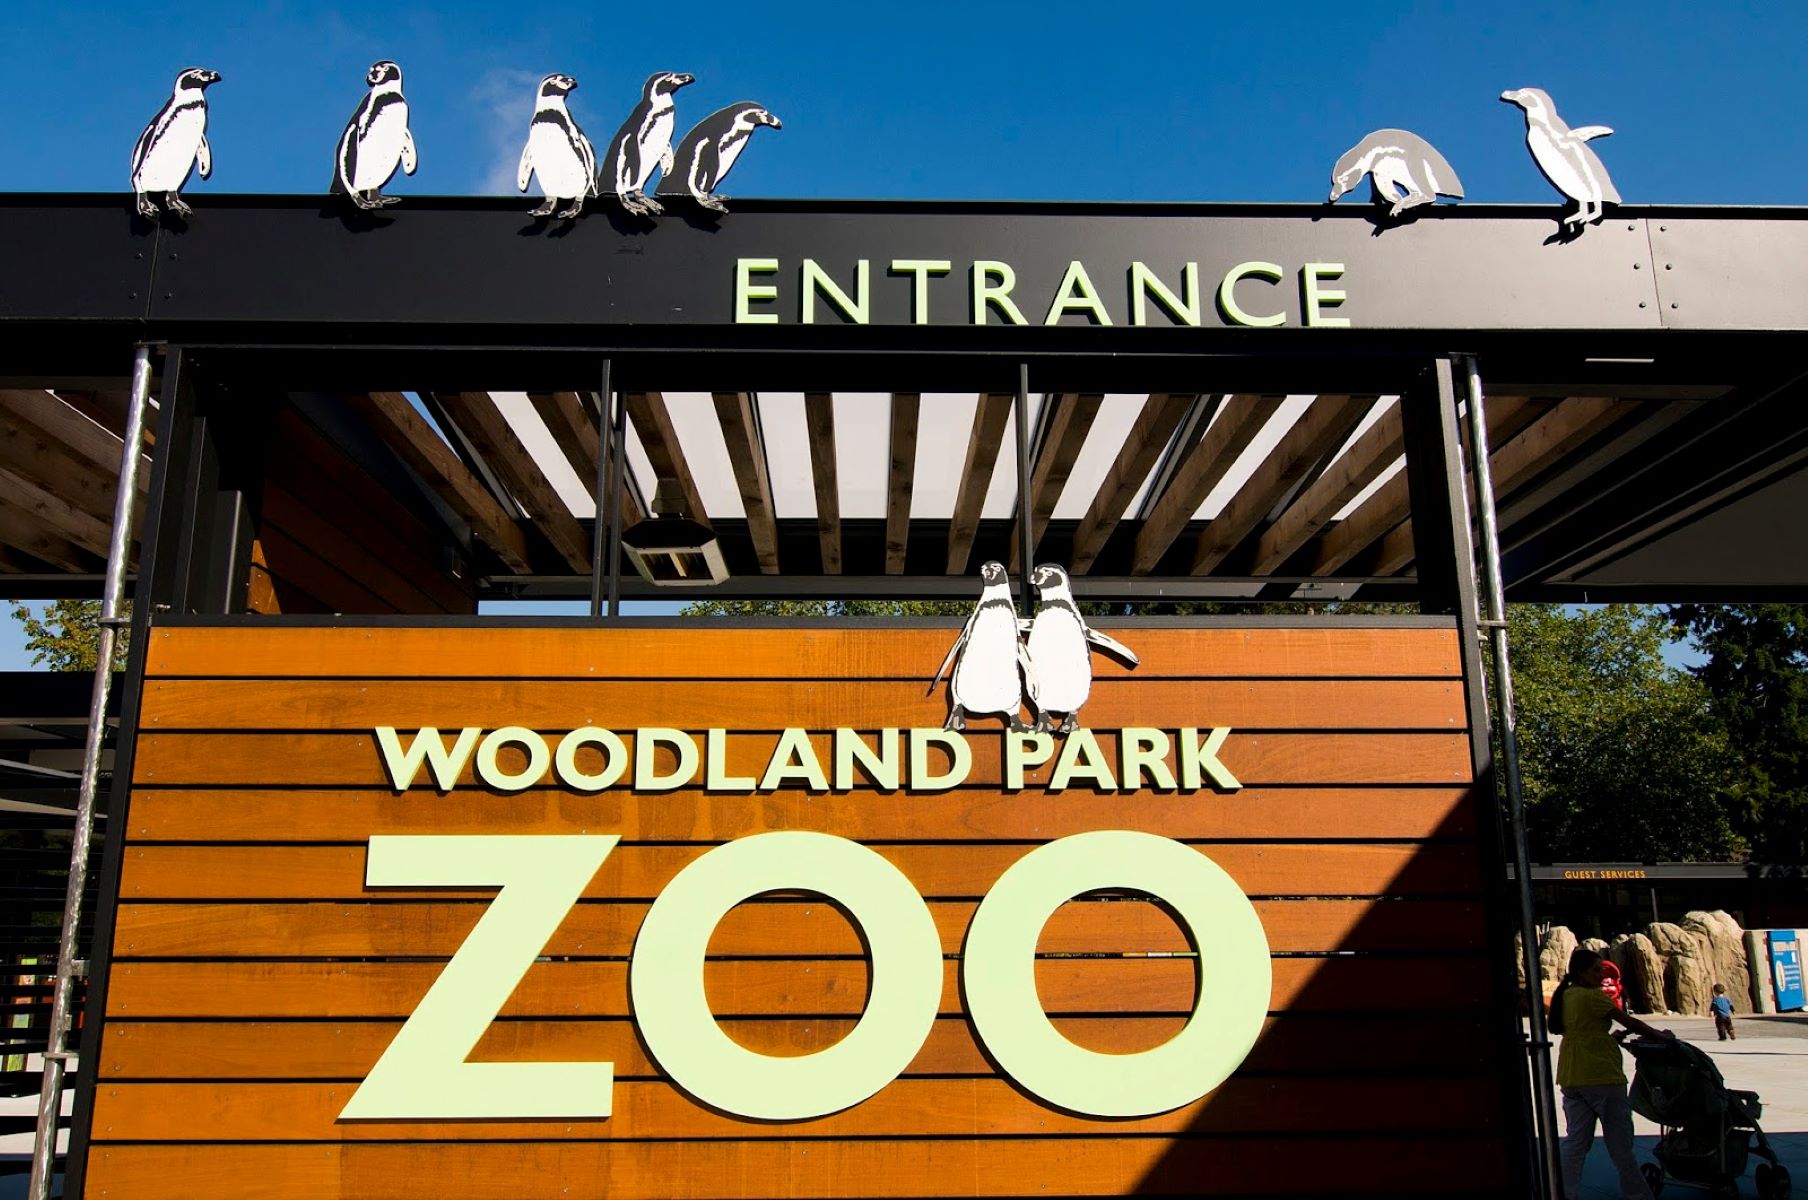 13-mind-blowing-facts-about-woodland-park-zoo